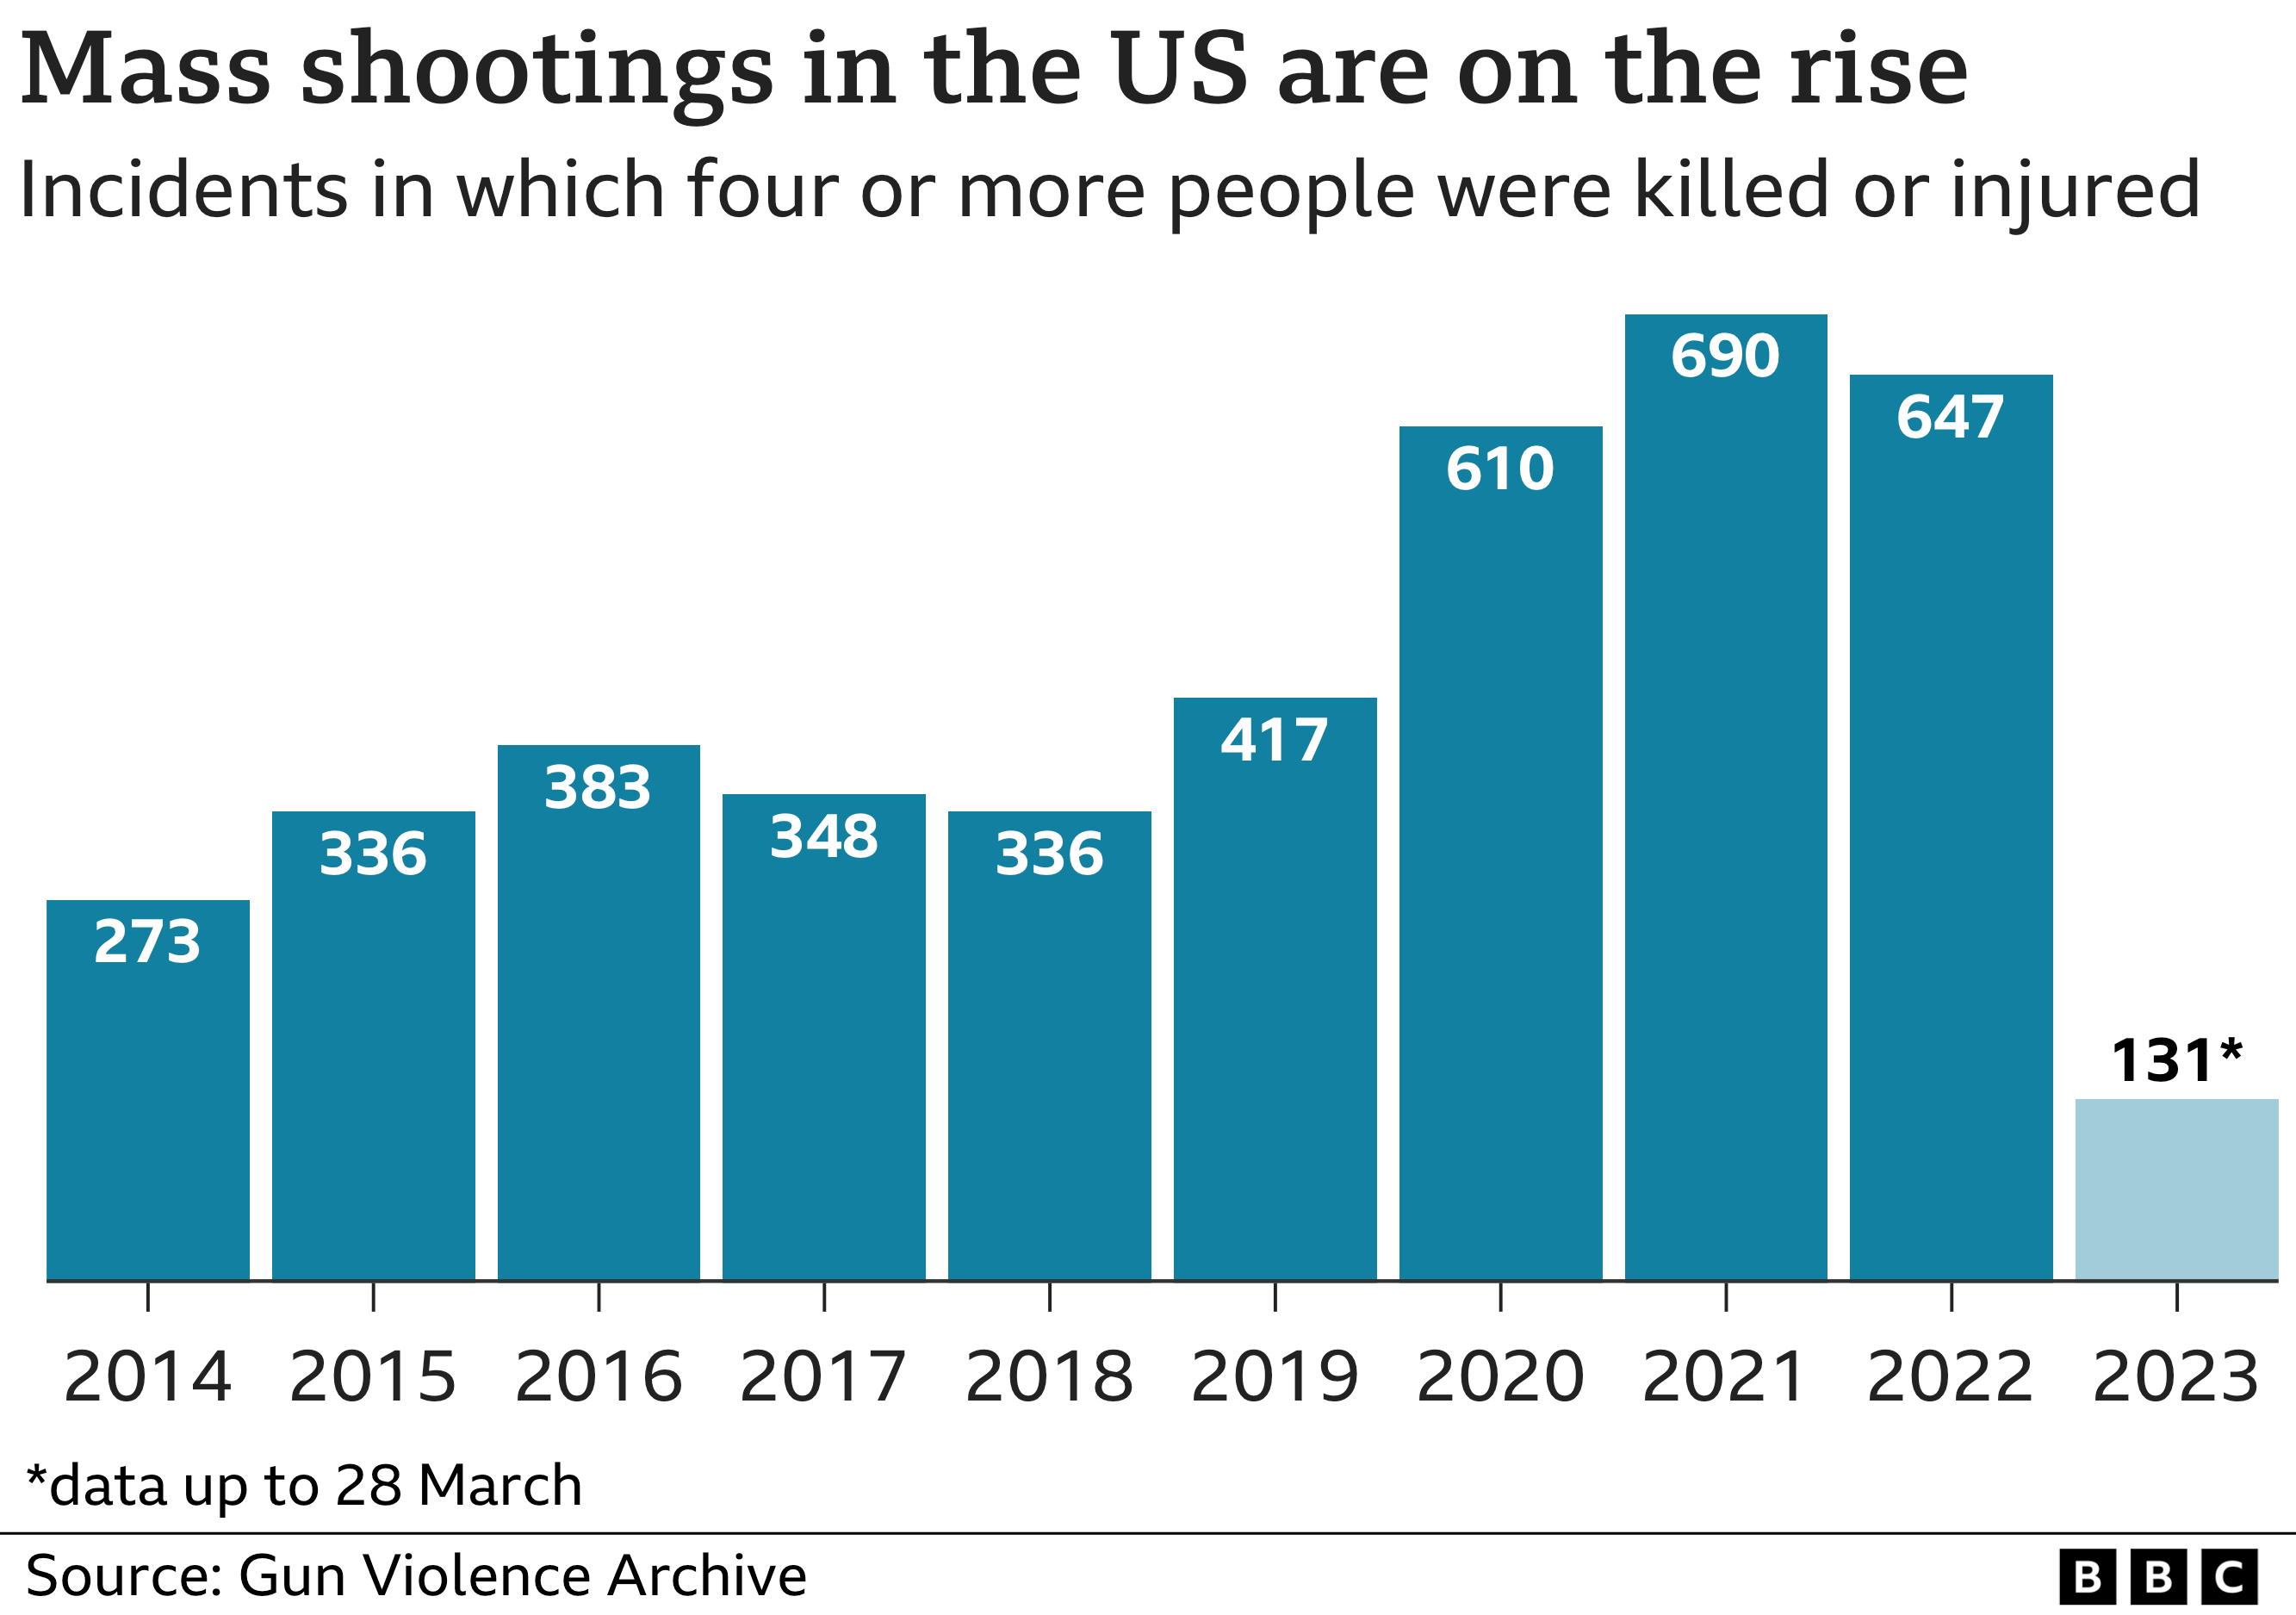 Why number of US mass shootings has risen sharply